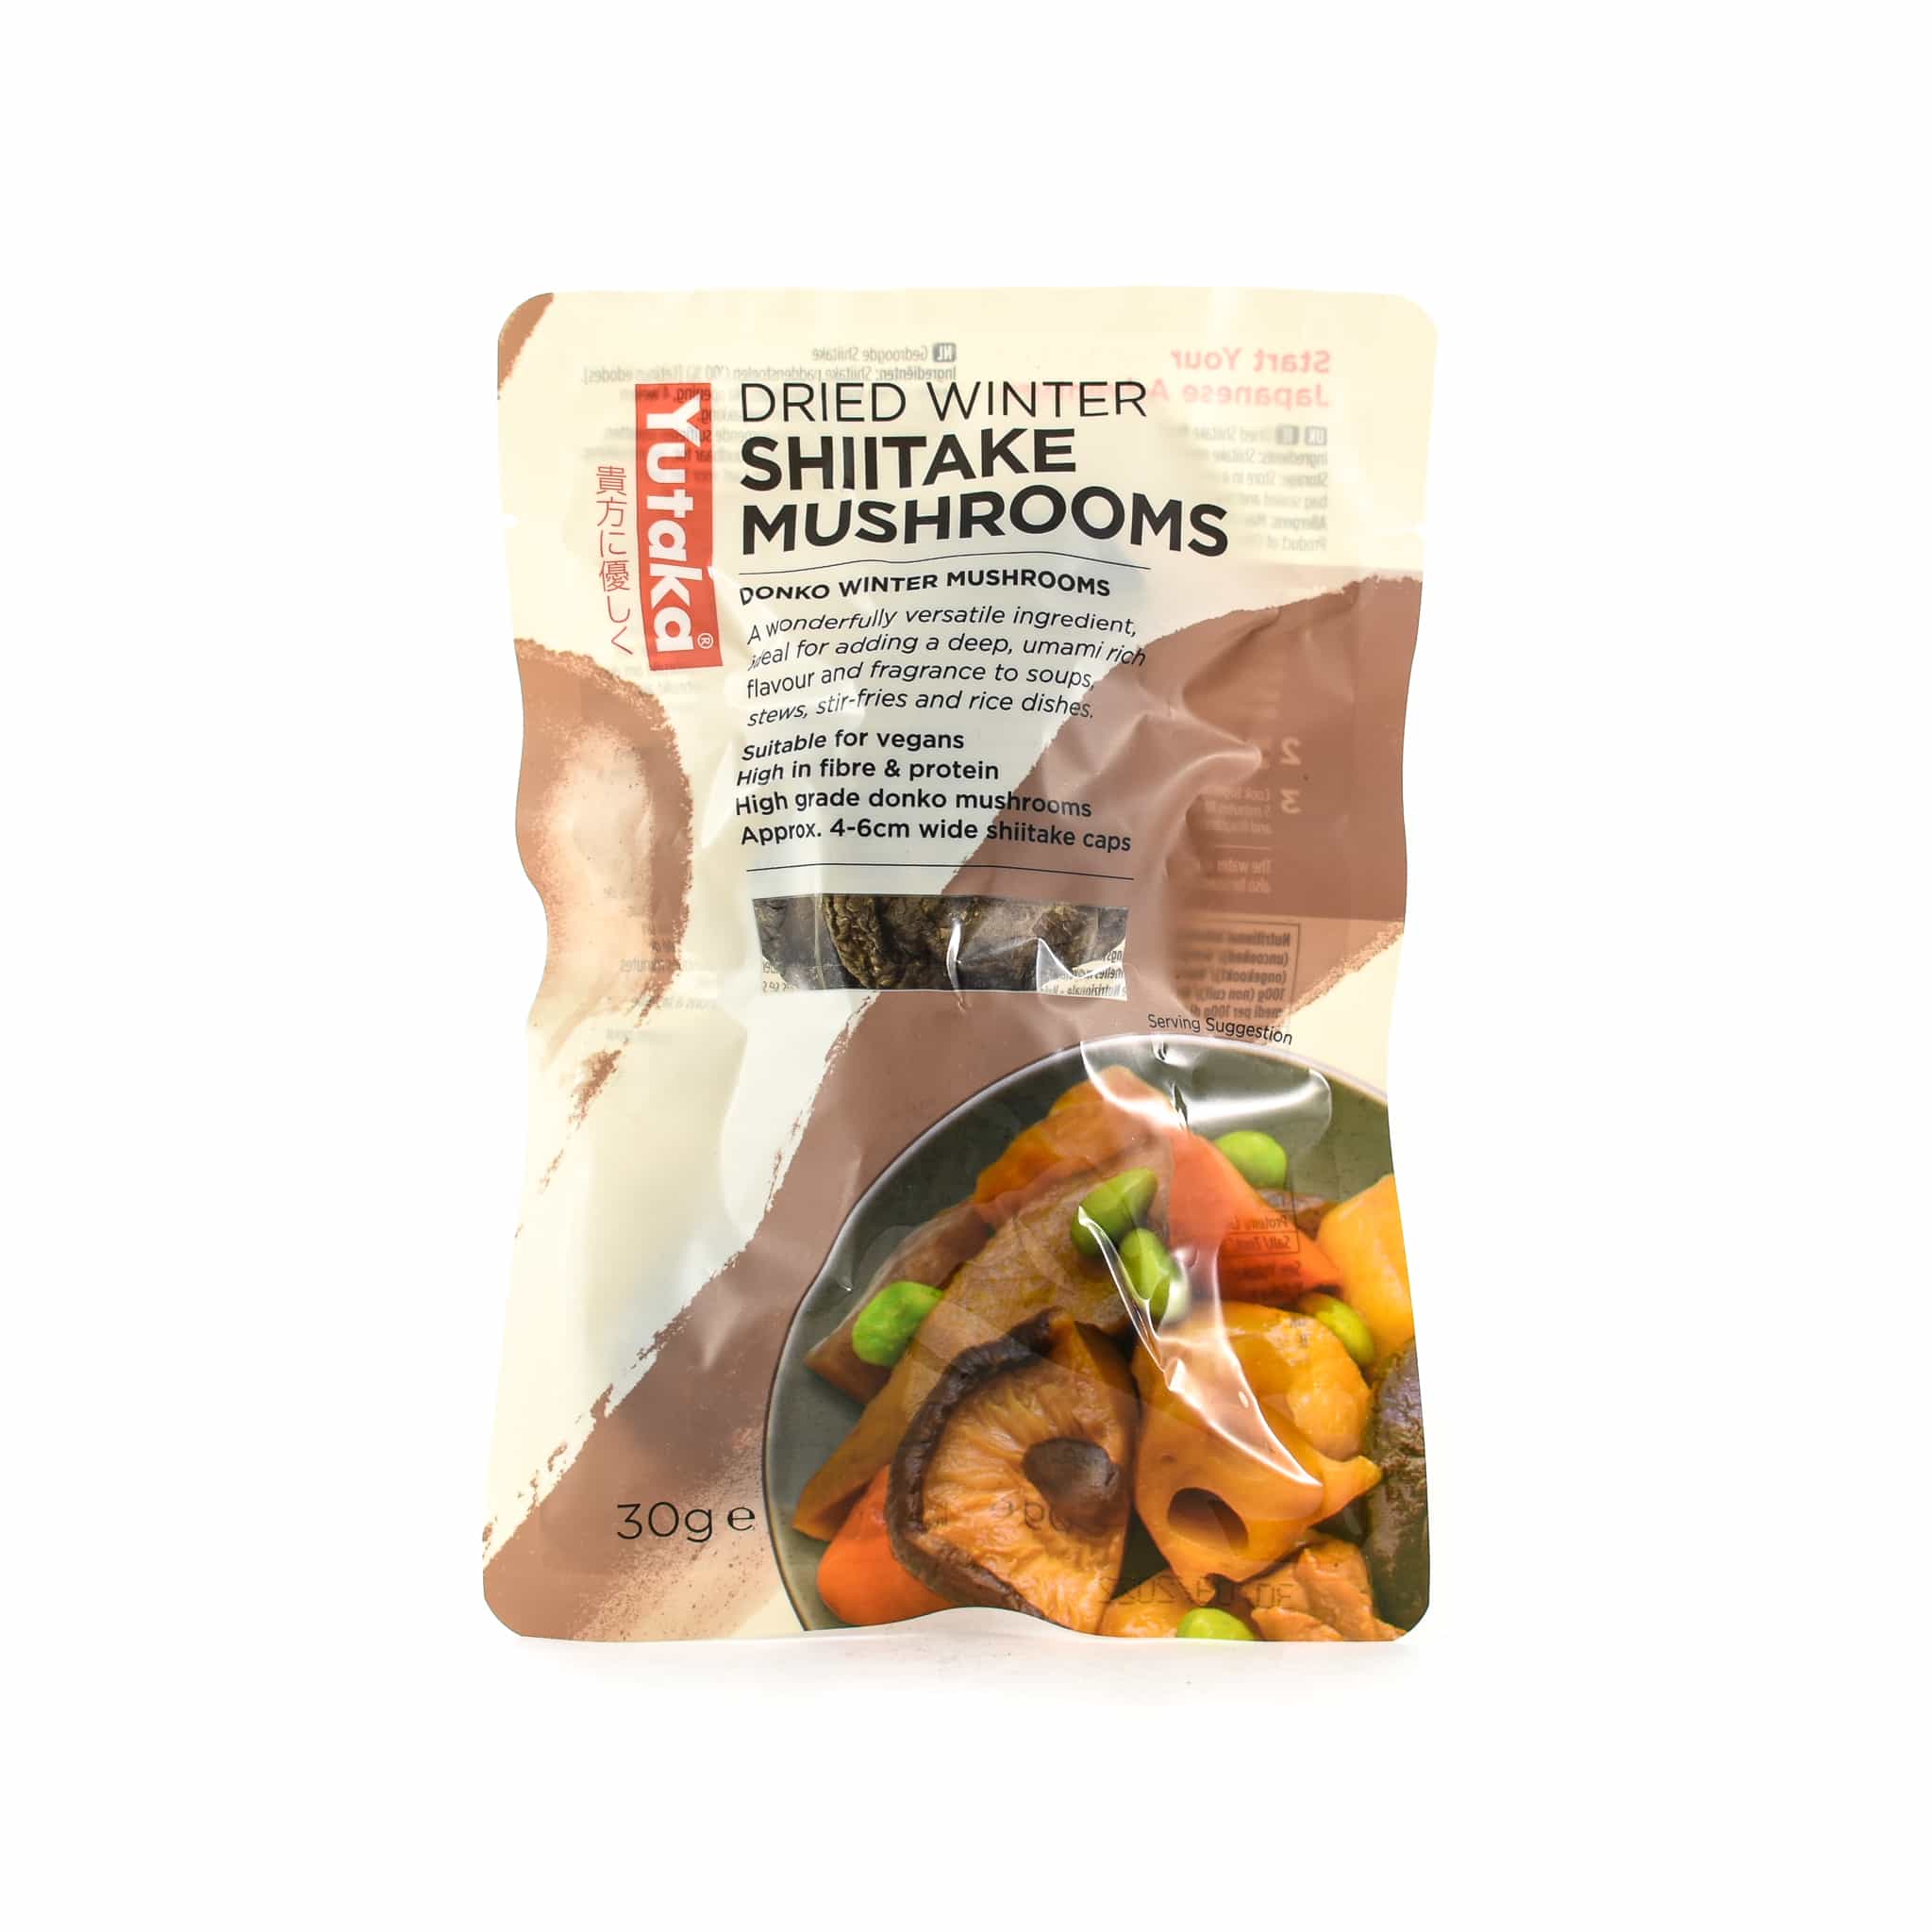 Dried Mushrooms | Buy online at Sous Chef UK